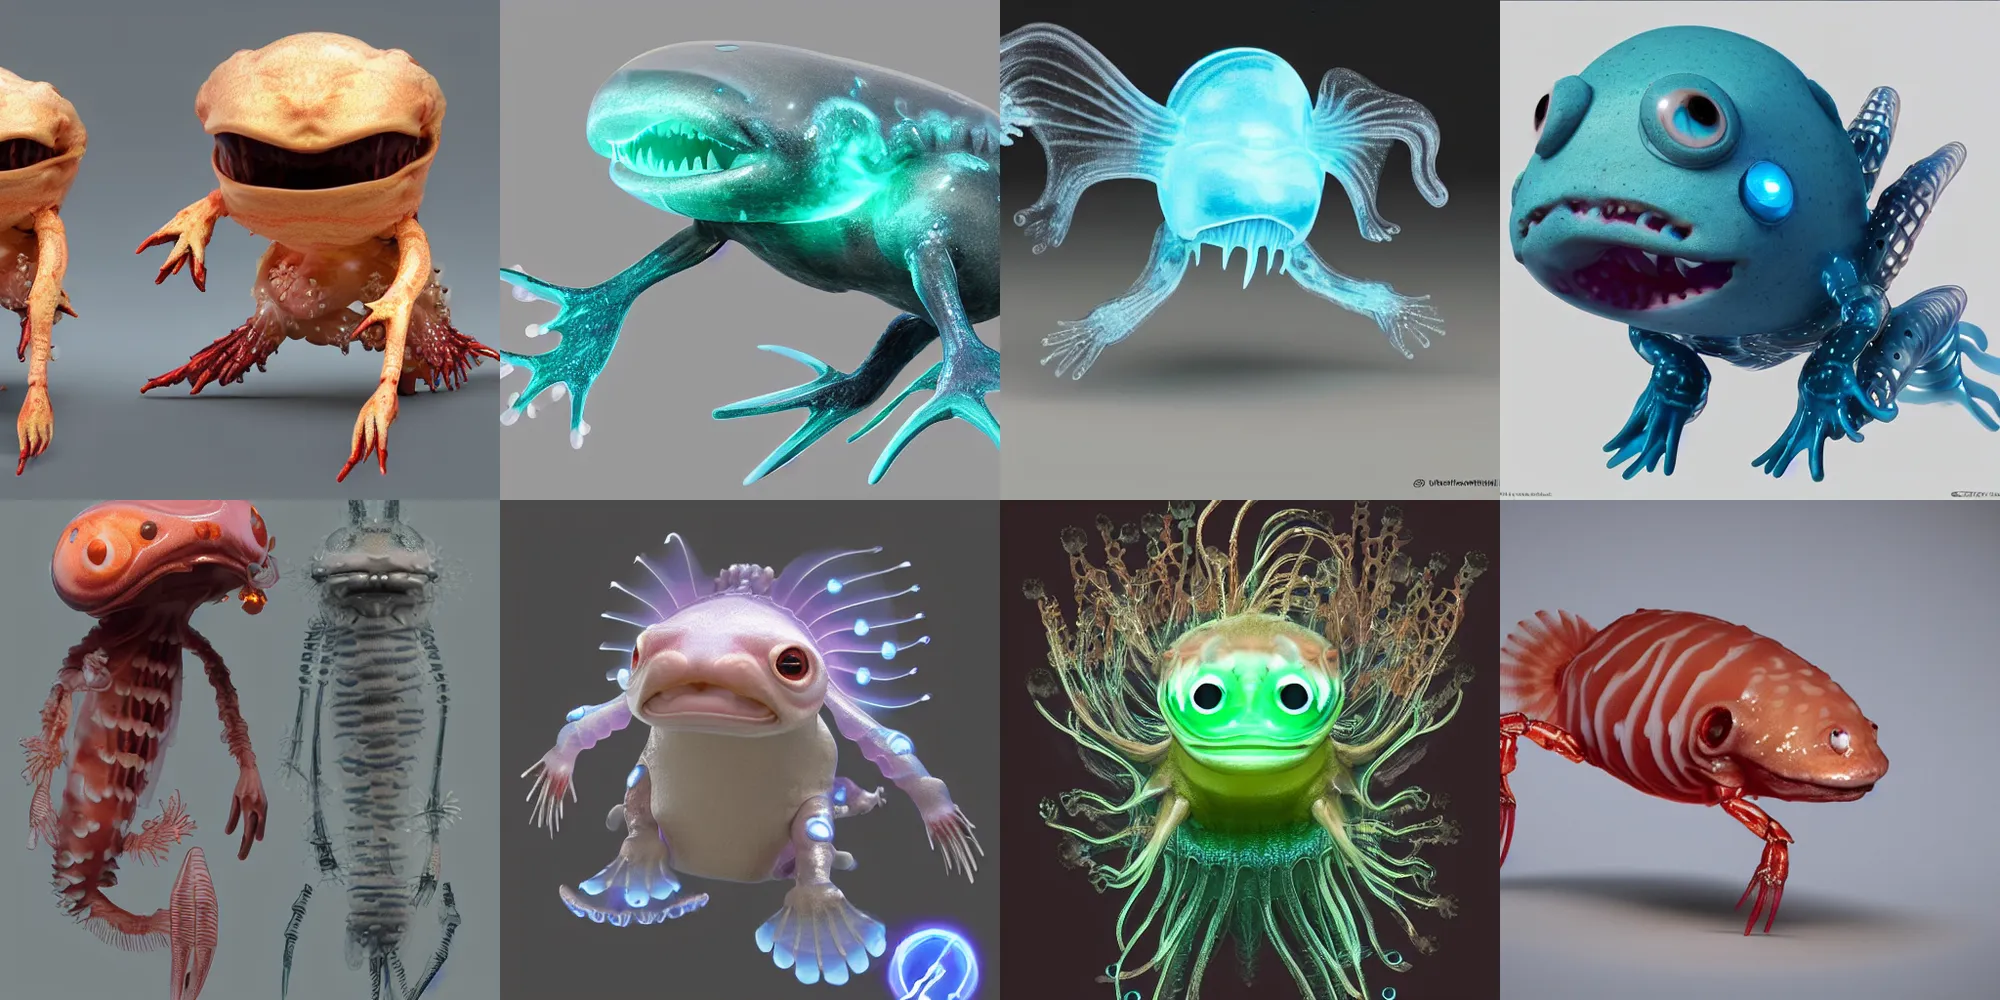 Prompt: cute! biomechanical axolotl, ghost shrimp, Barreleye fish, translucent SSS xray, Barreleye, rimlight, jelly fish dancing, fighting, bioluminescent screaming pictoplasma characterdesign toydesign toy monster creature, zbrush, octane, hardsurface modelling, artstation, cg society, by greg rutkowksi, by Eddie Mendoza, by Peter mohrbacher, by tooth wu